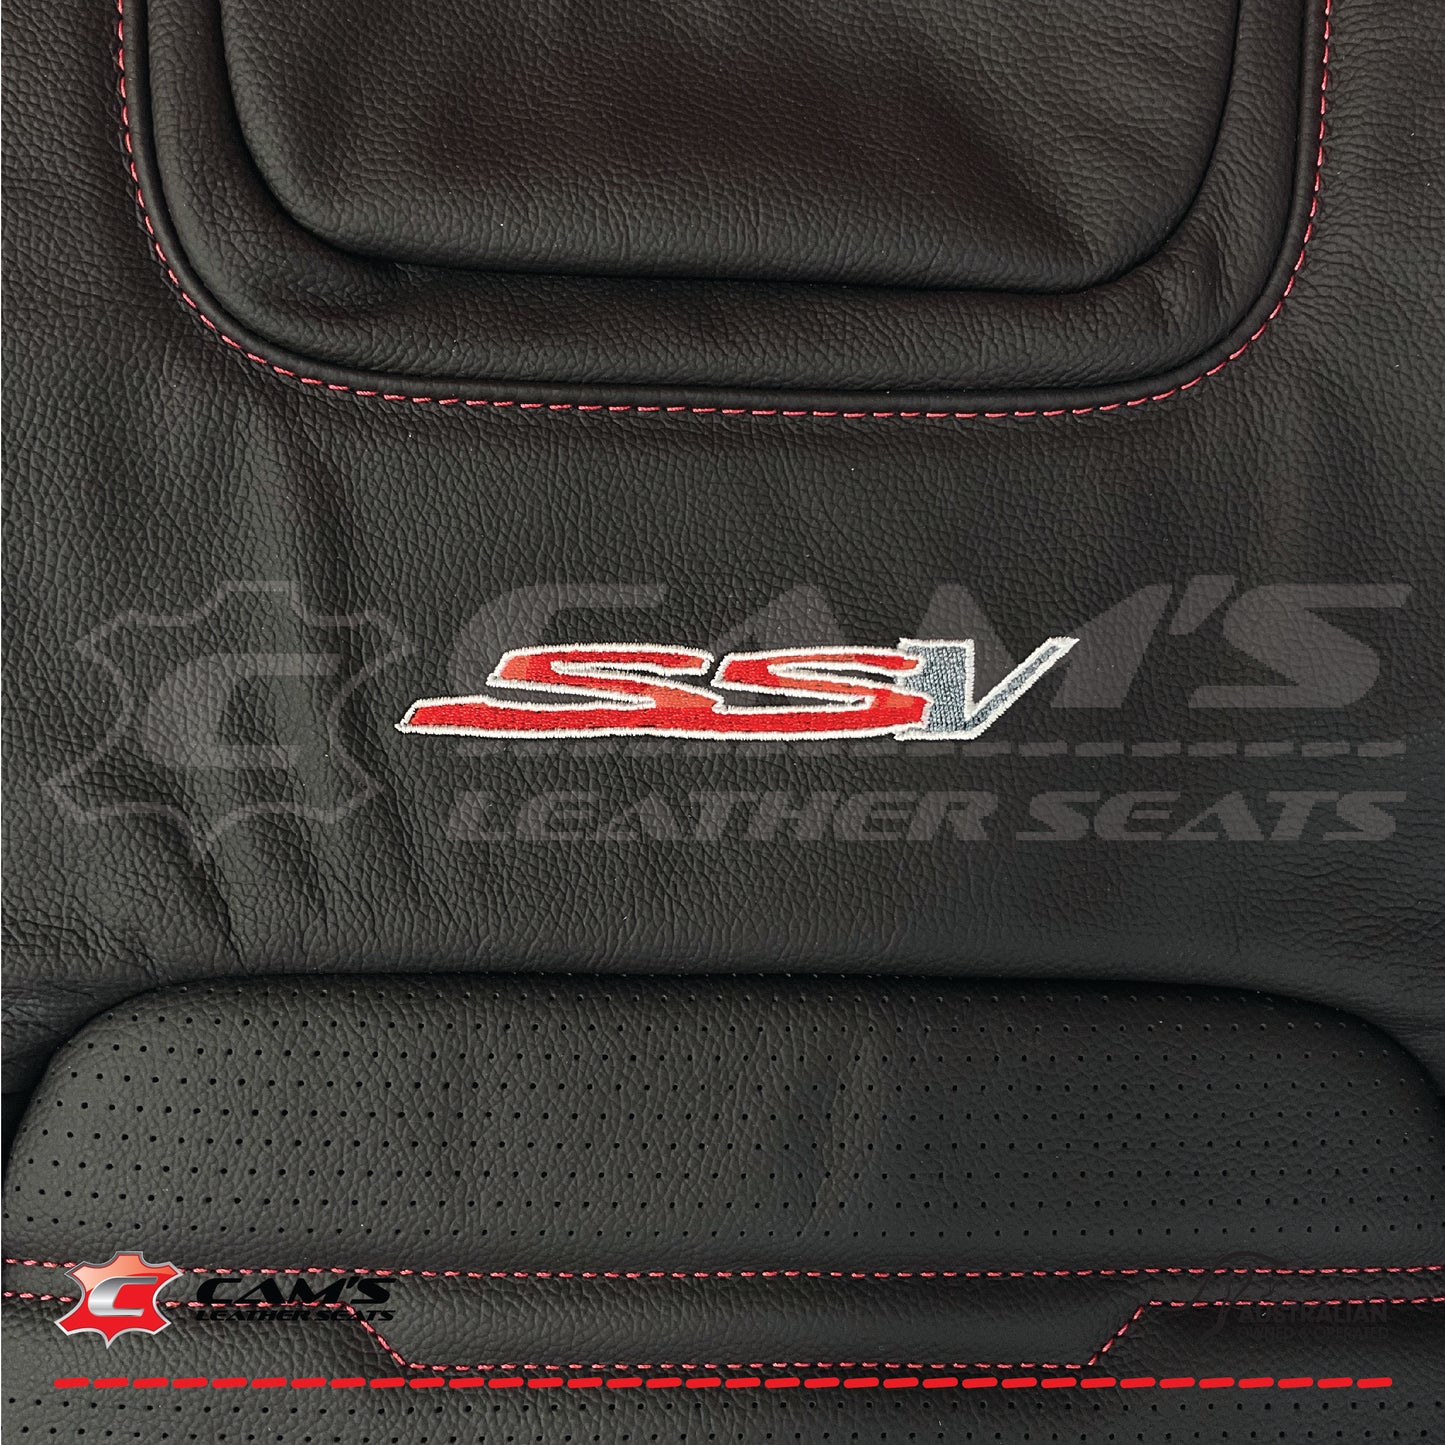 LEATHER SEATS TRIM KIT FOR HOLDEN VE SS SSV UTE ONYX RED SPECIAL STITCH INSERTS